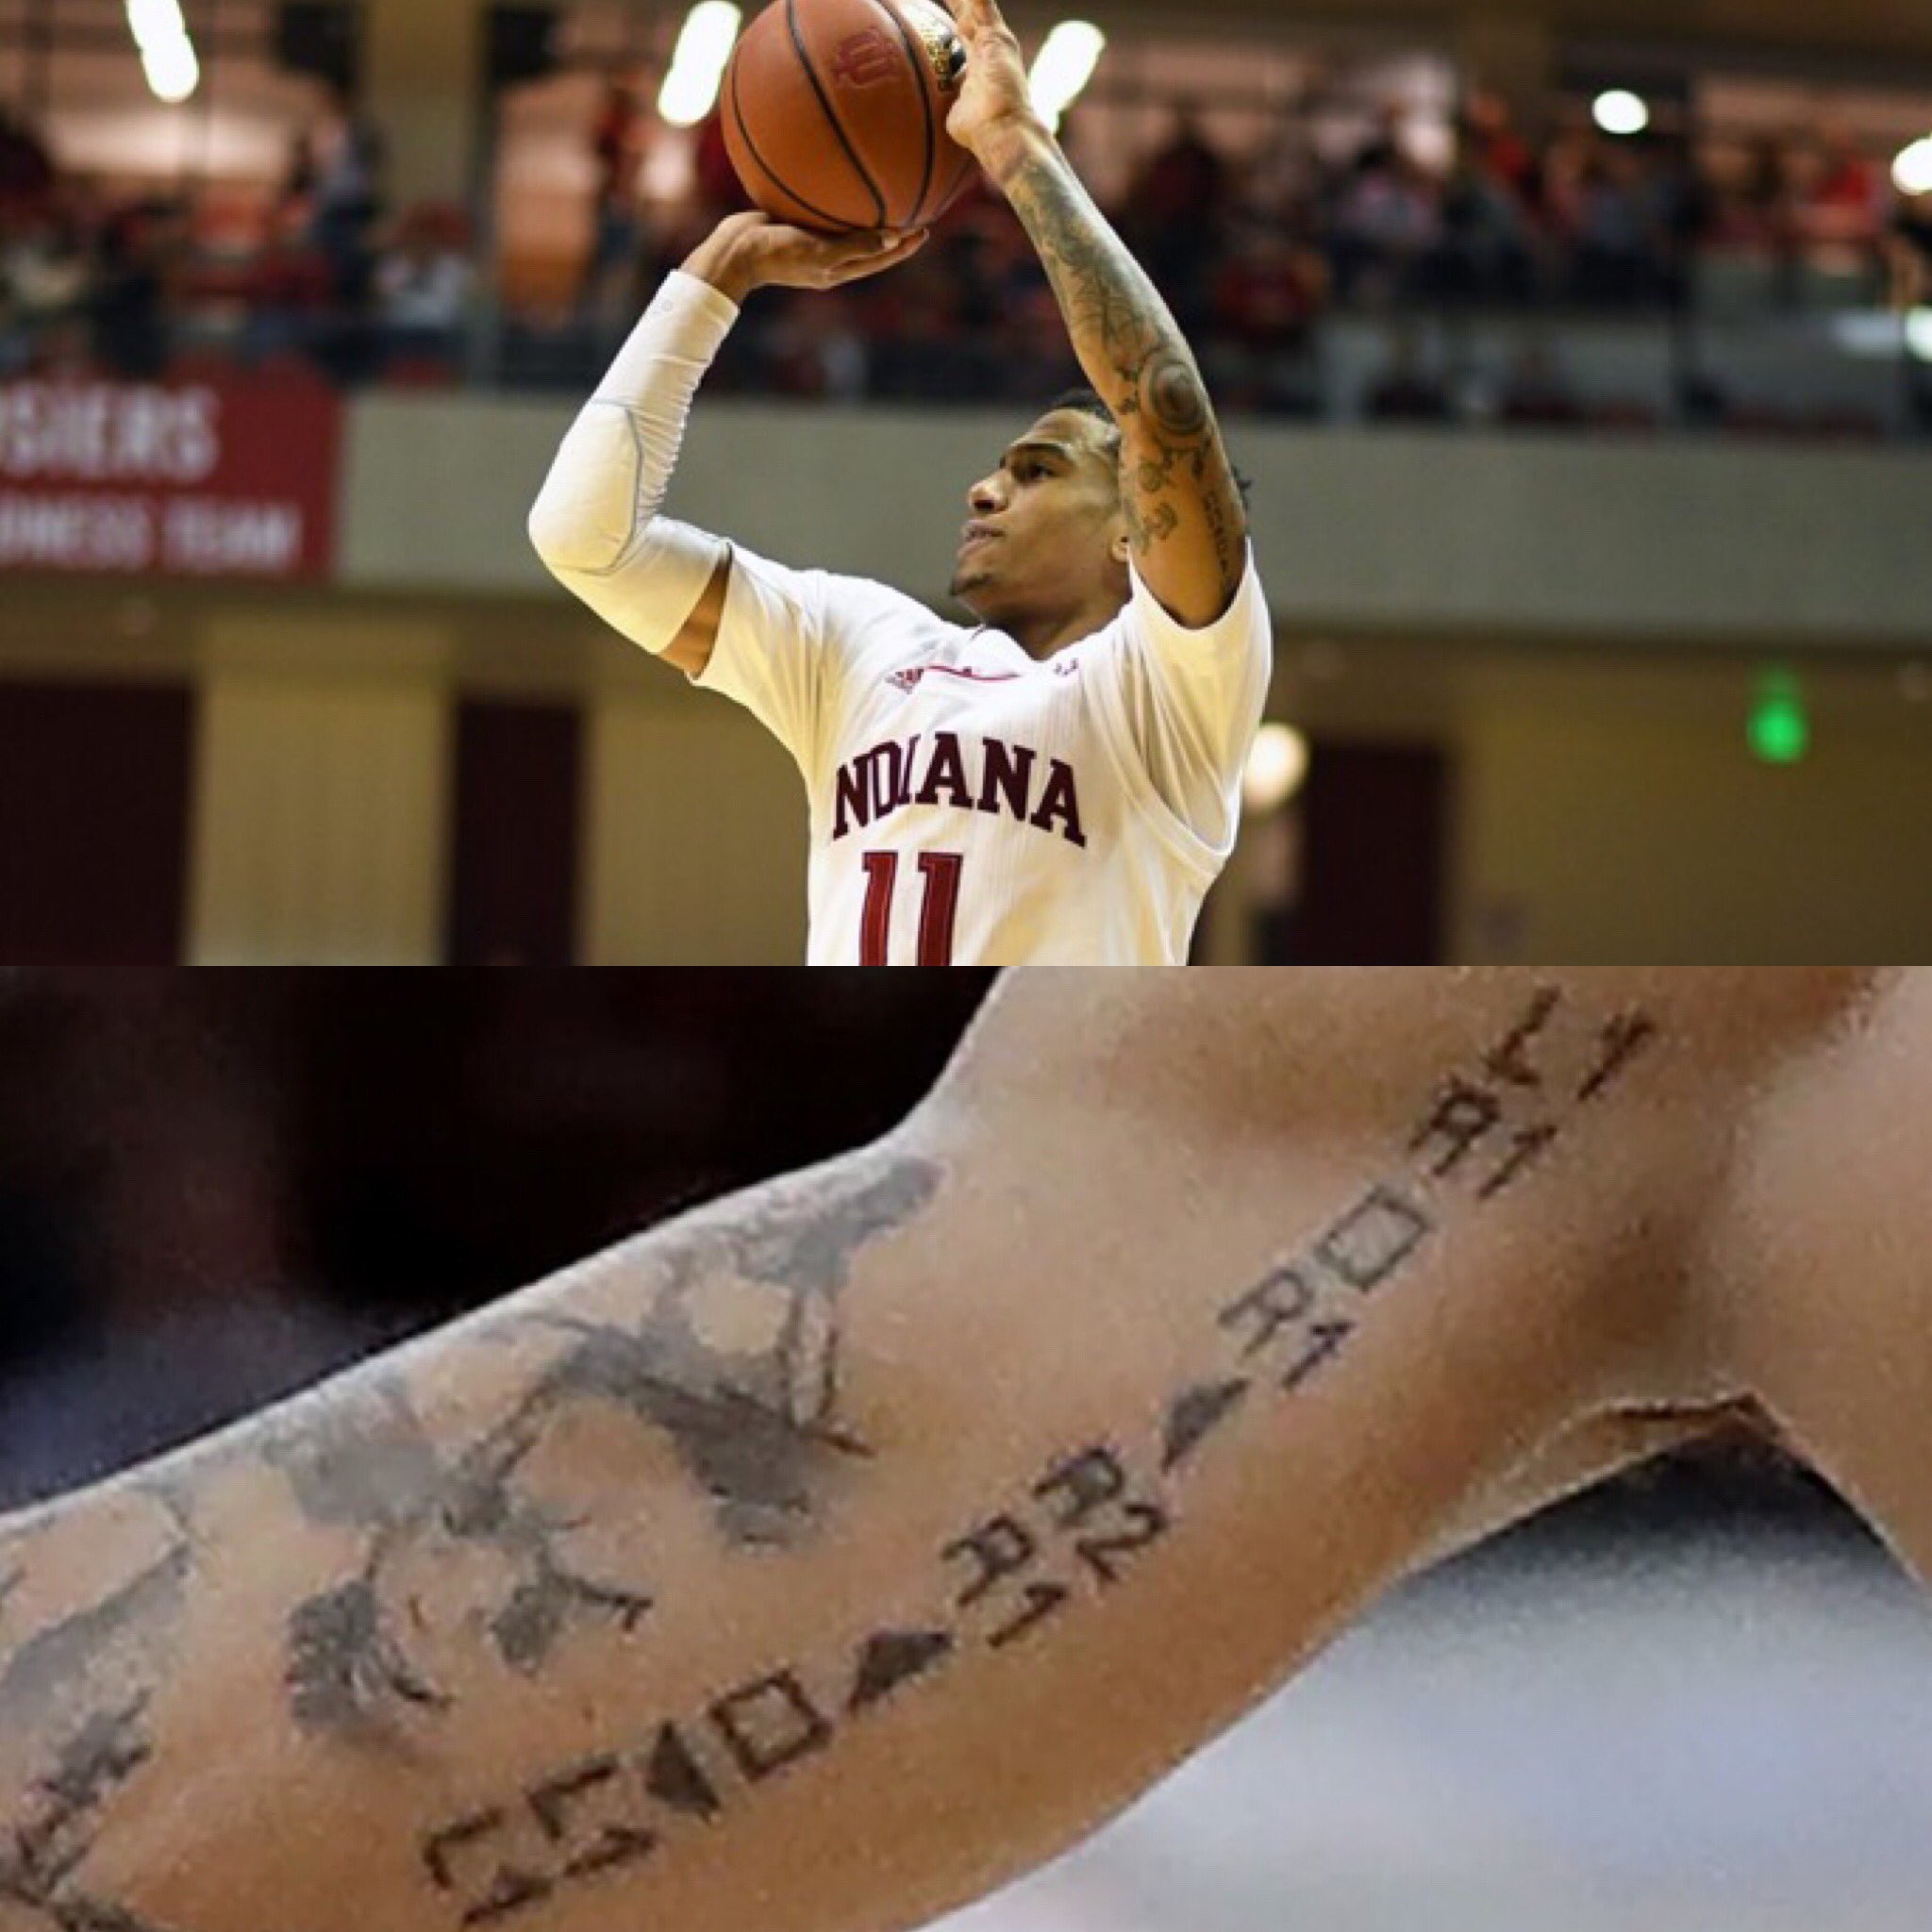 SLAM Gaming on X: "Devonte Green has the unlimited ammo cheat code from GTA tattooed on his arm. (Via @YahooSportsNBA) https://t.co/wzacllRiTN" / X